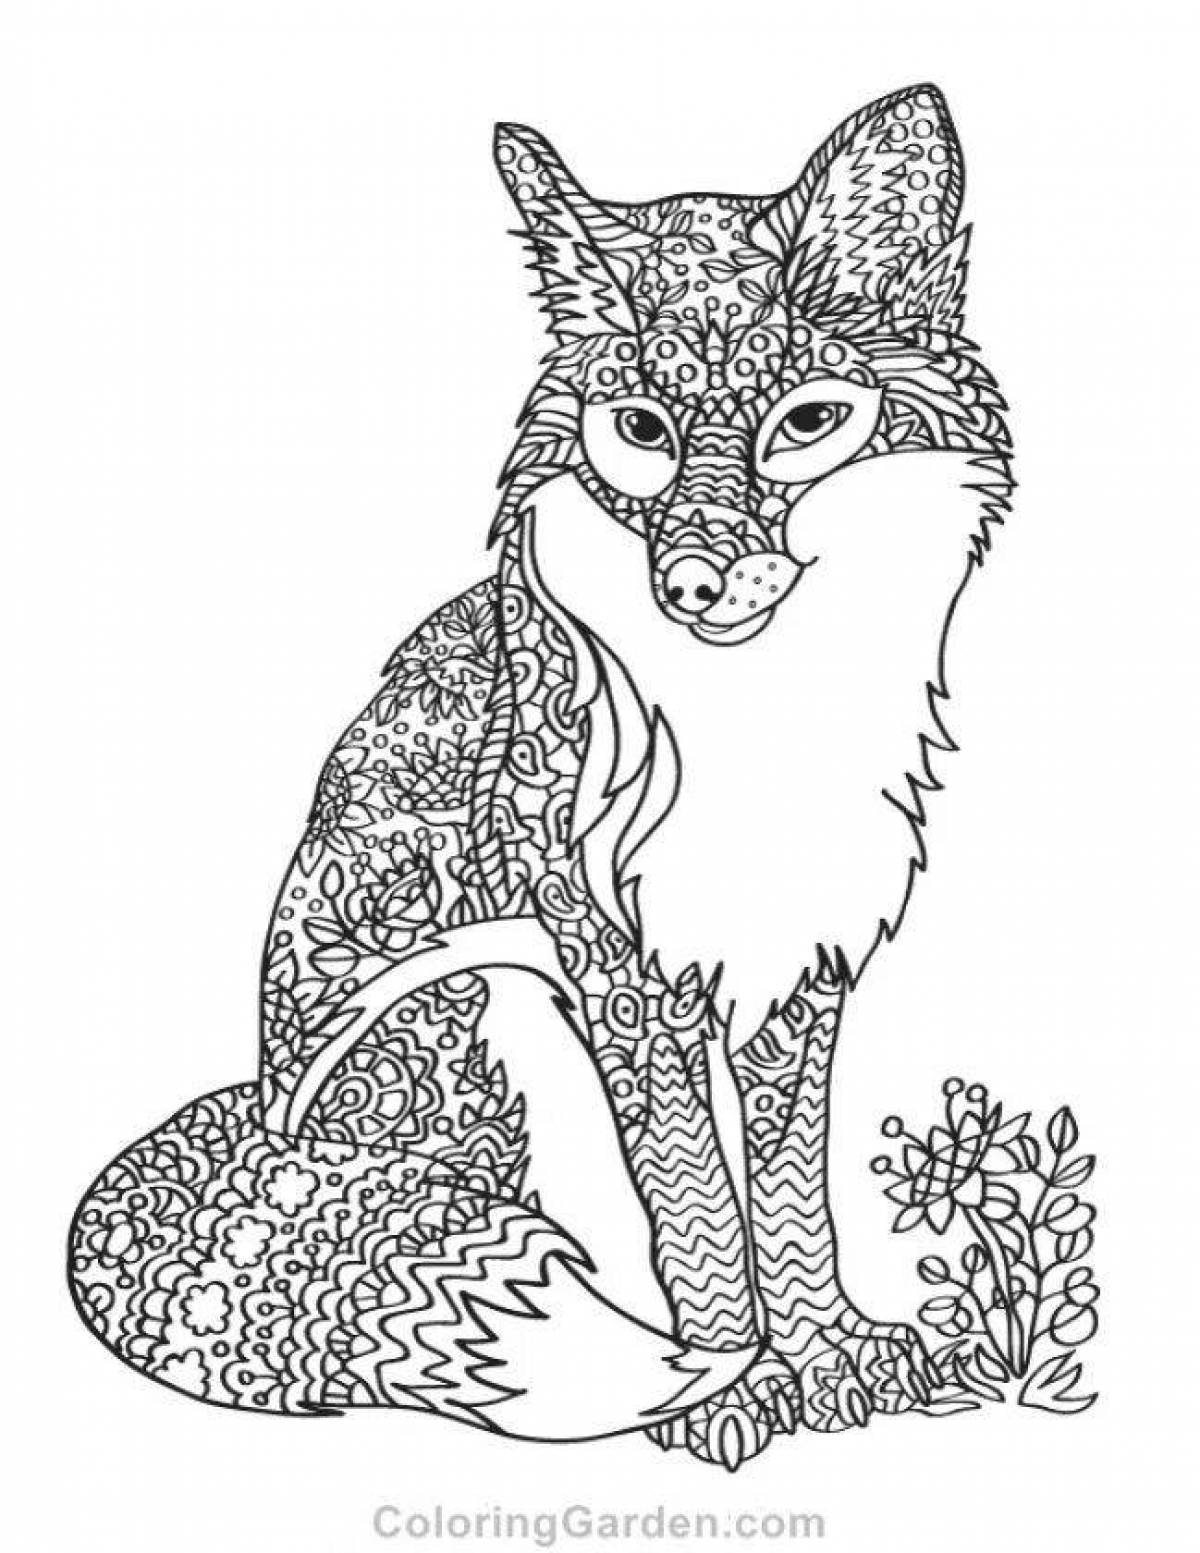 Coloring page blissful anti-stress fox